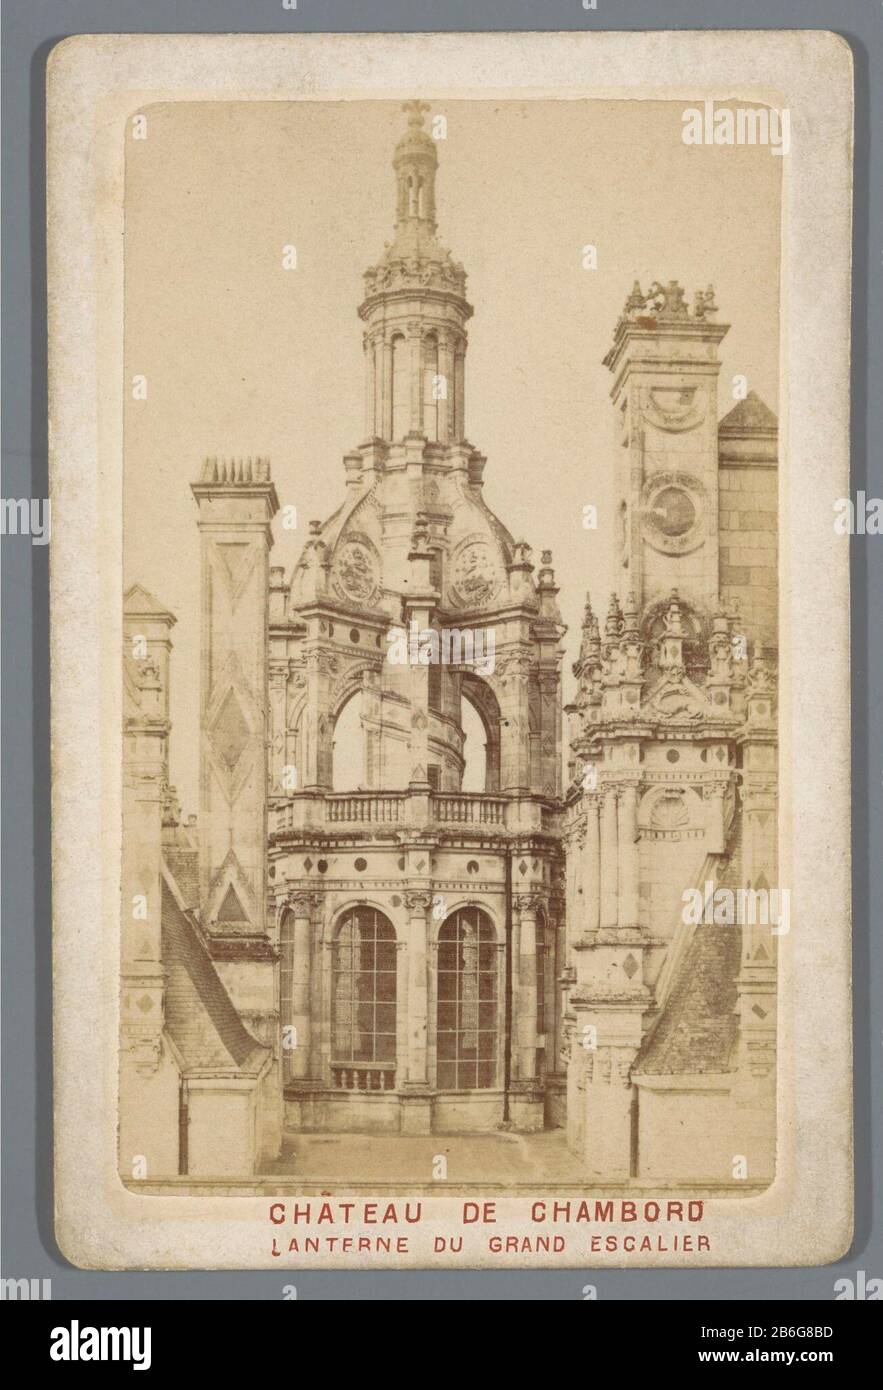 Chateau de Chambord, Lantern Grand Staircase Chateau de Chambord, Lanterne  du Grand Escalier Object Type : picture carte-de-visite Object number: RP-F  F24629 Manufacturer : Photographer: anonymous Date: 1855 - 1900 Dimensions:  whole: